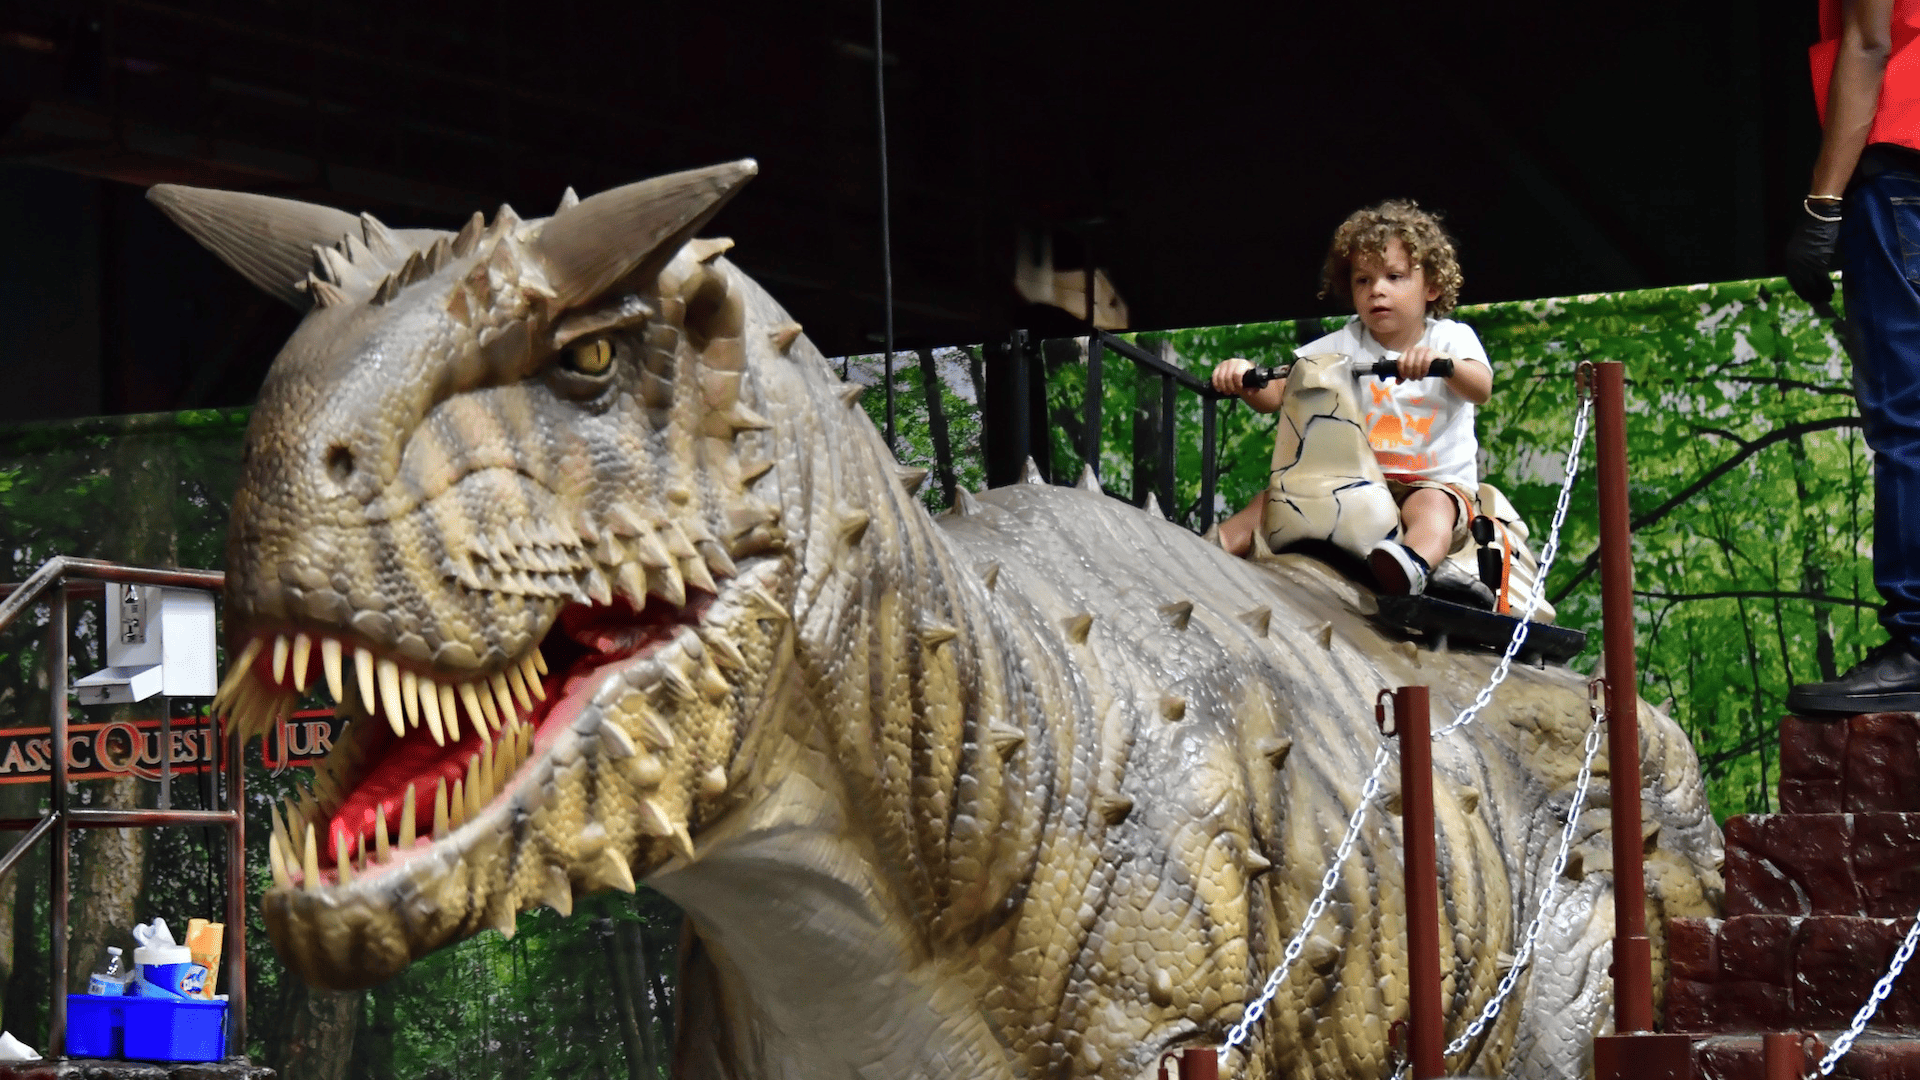 Jurassic Quest brings dinosaurs to Tampa this summer That's So Tampa